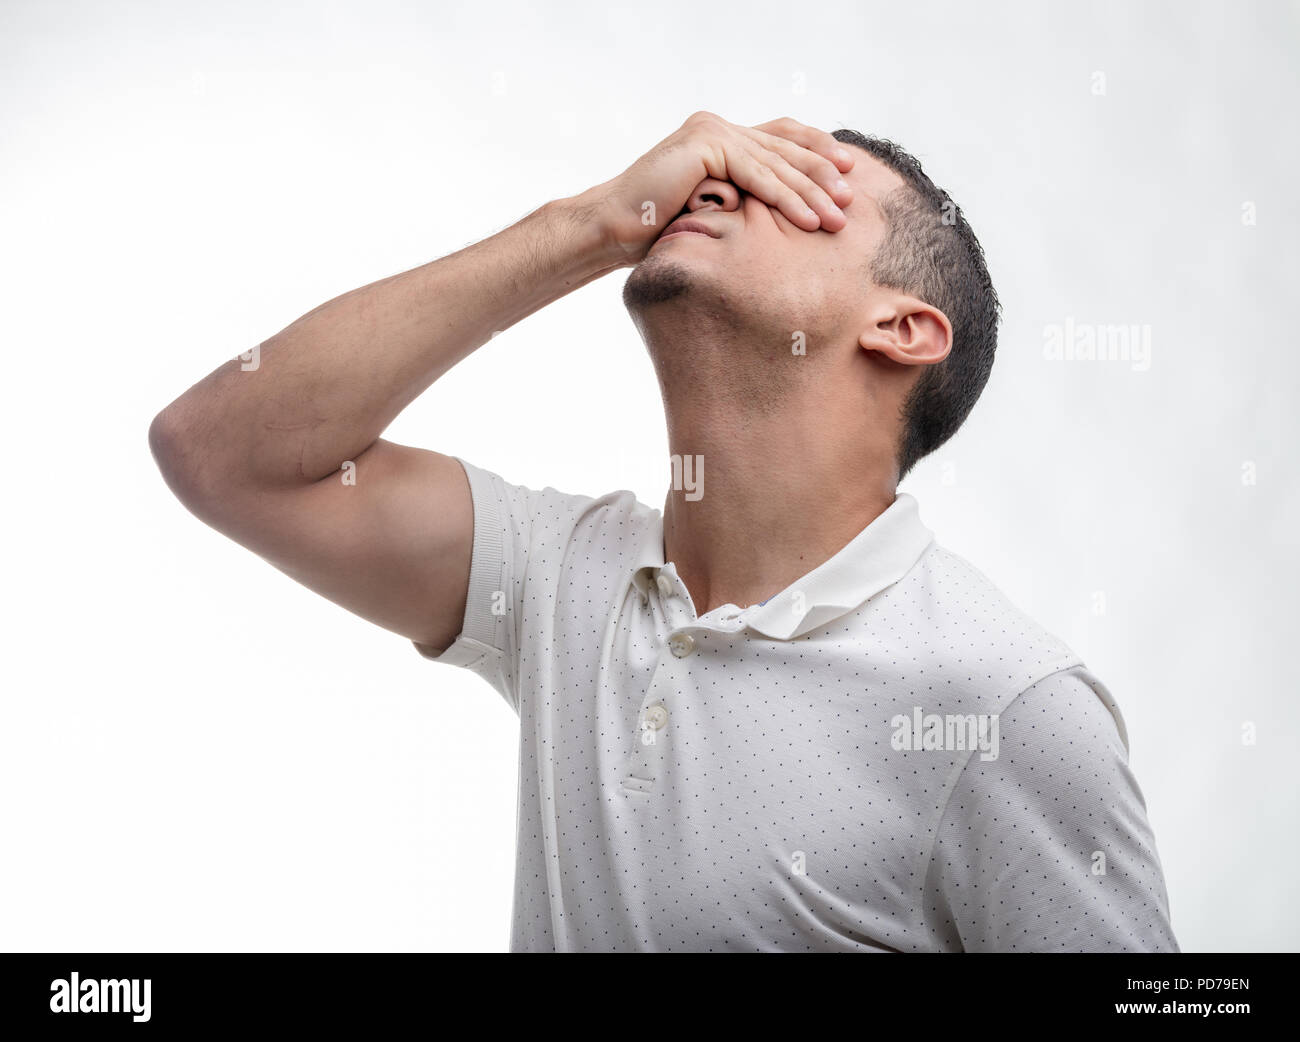 Man covering his face with his hand as he tilts back his head in a conceptual image of despair, sorrow, forgetfulness or hopelessness on white Stock Photo